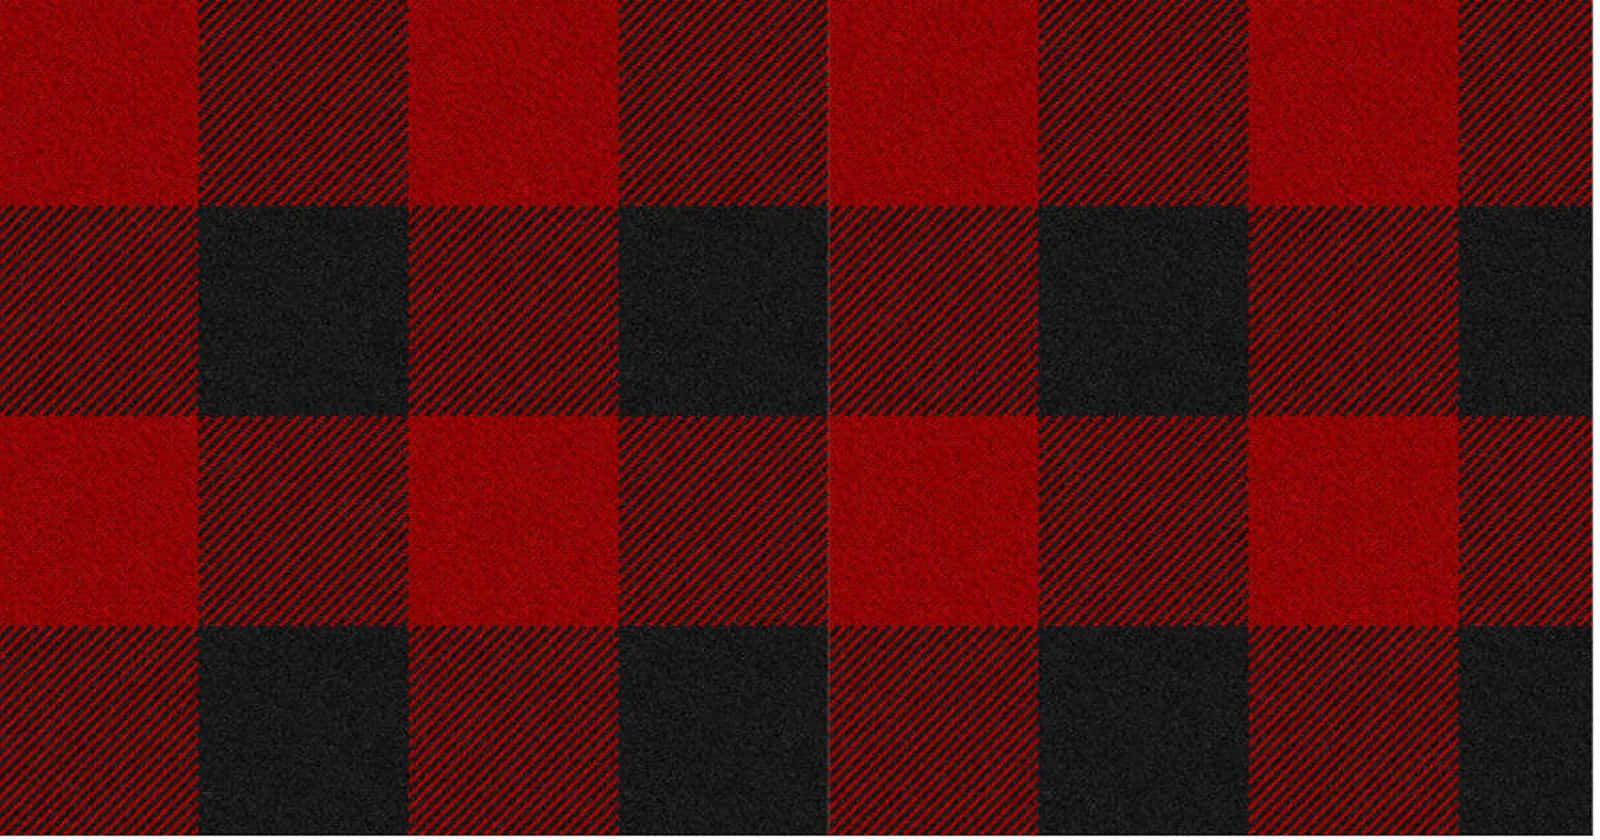 A Red And Black Plaid Fabric